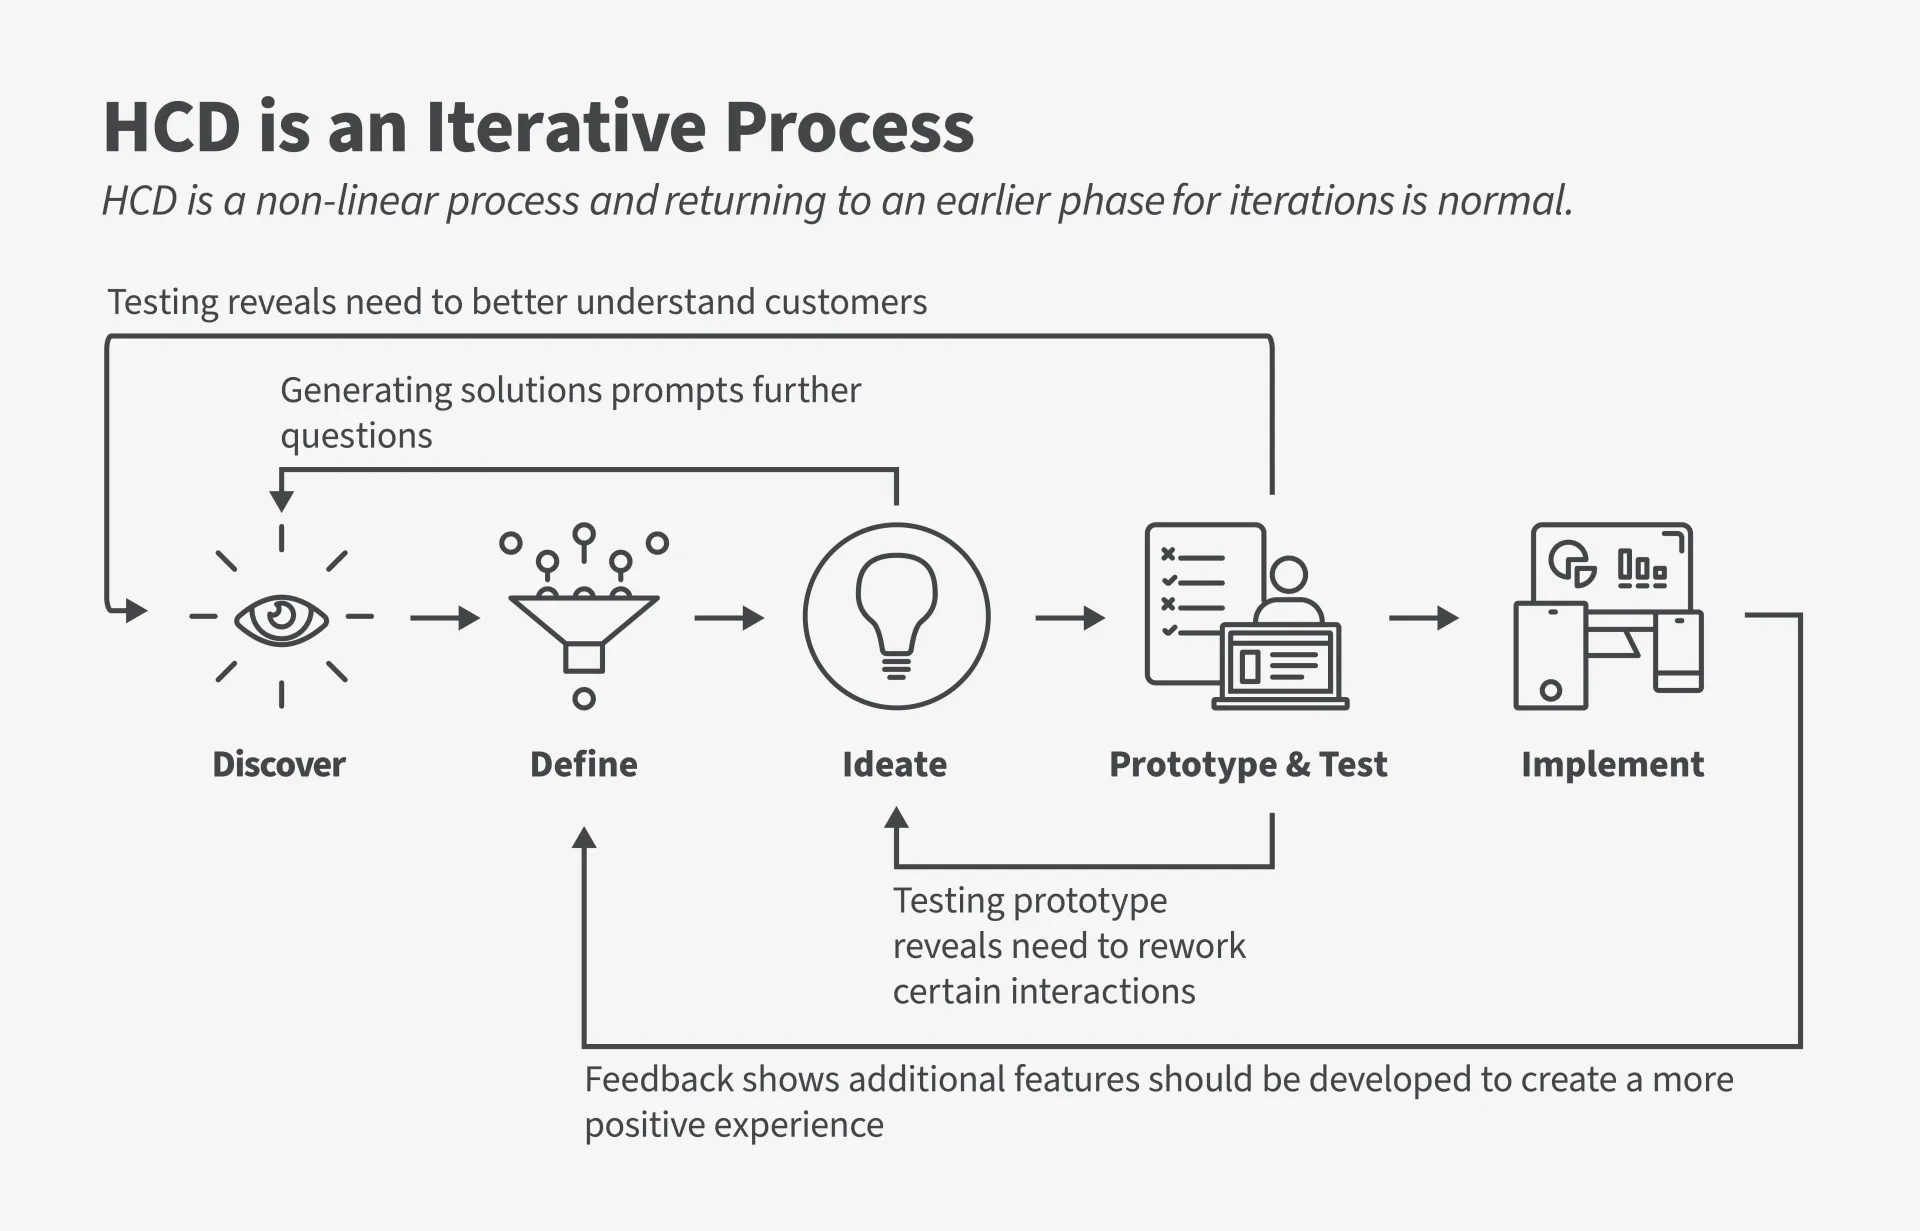 Infographic with five icons showing the five phases of human-centered design being discover, define, ideate, prototype & test, and implement and the process of iterations with arrows pointing from each phase back to a previous phase of HCD.